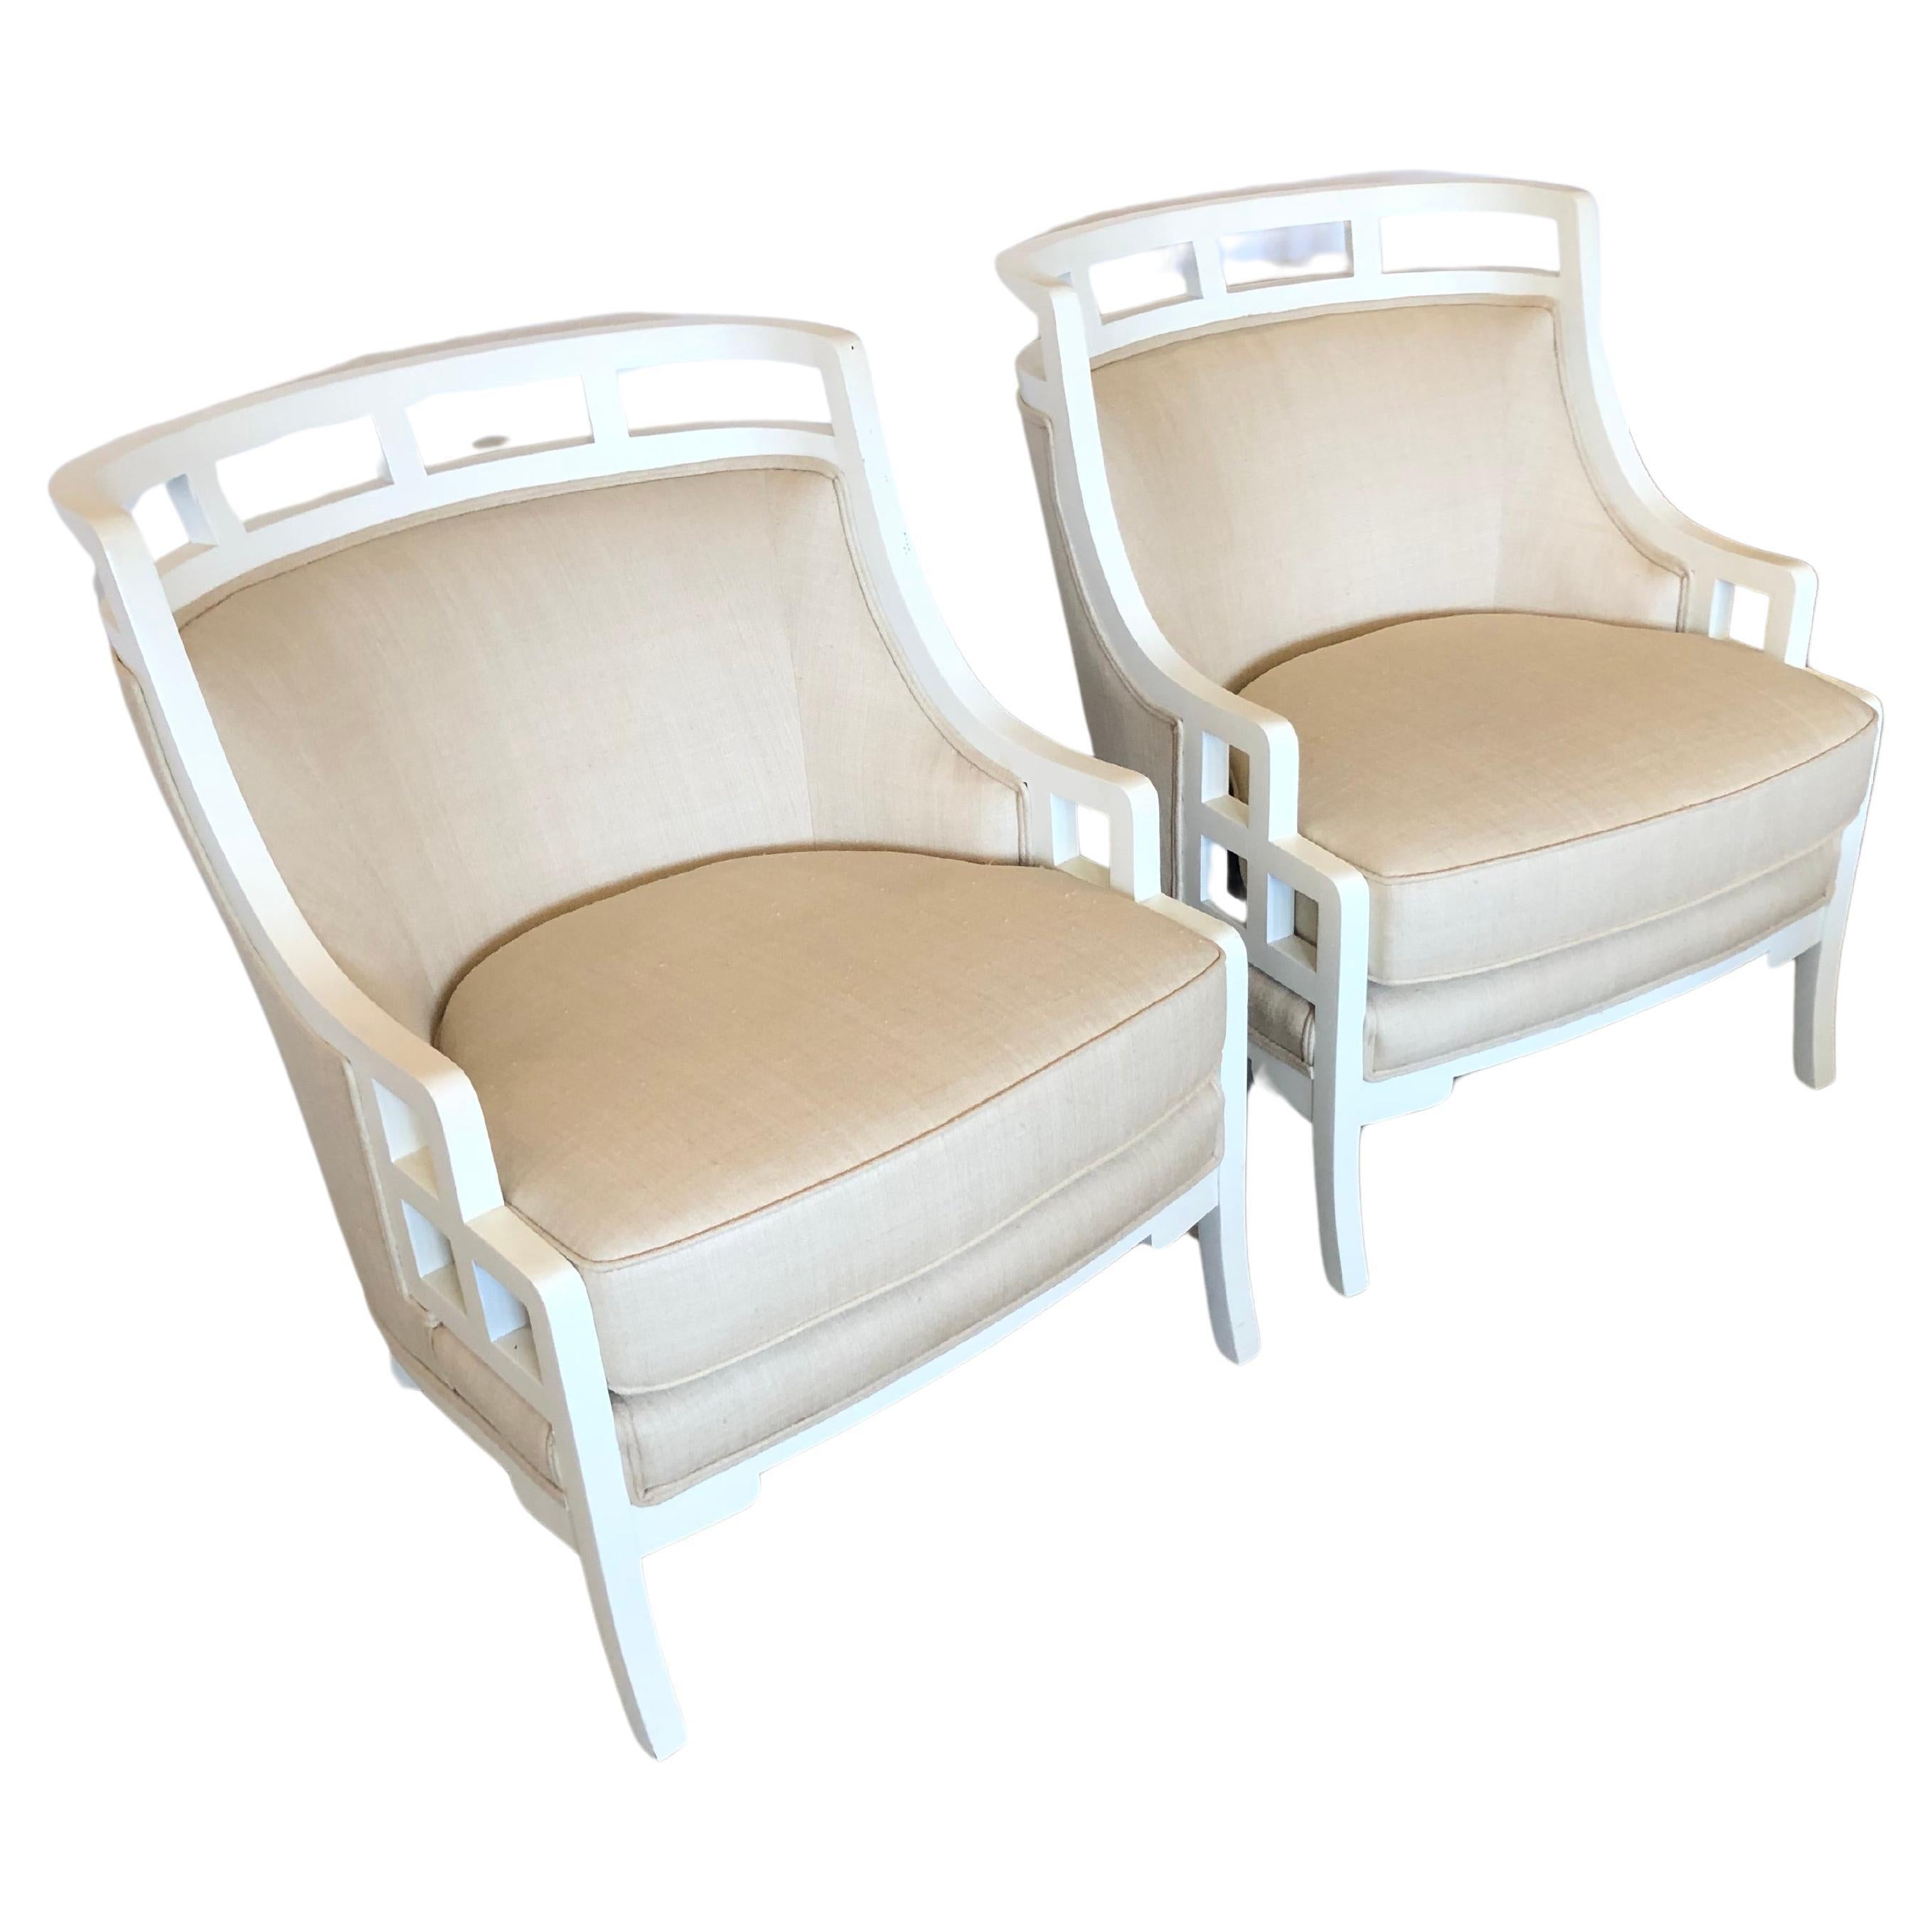 Chic Pair of White Painted Barrel Back Club Chairs Upholstered in Linen